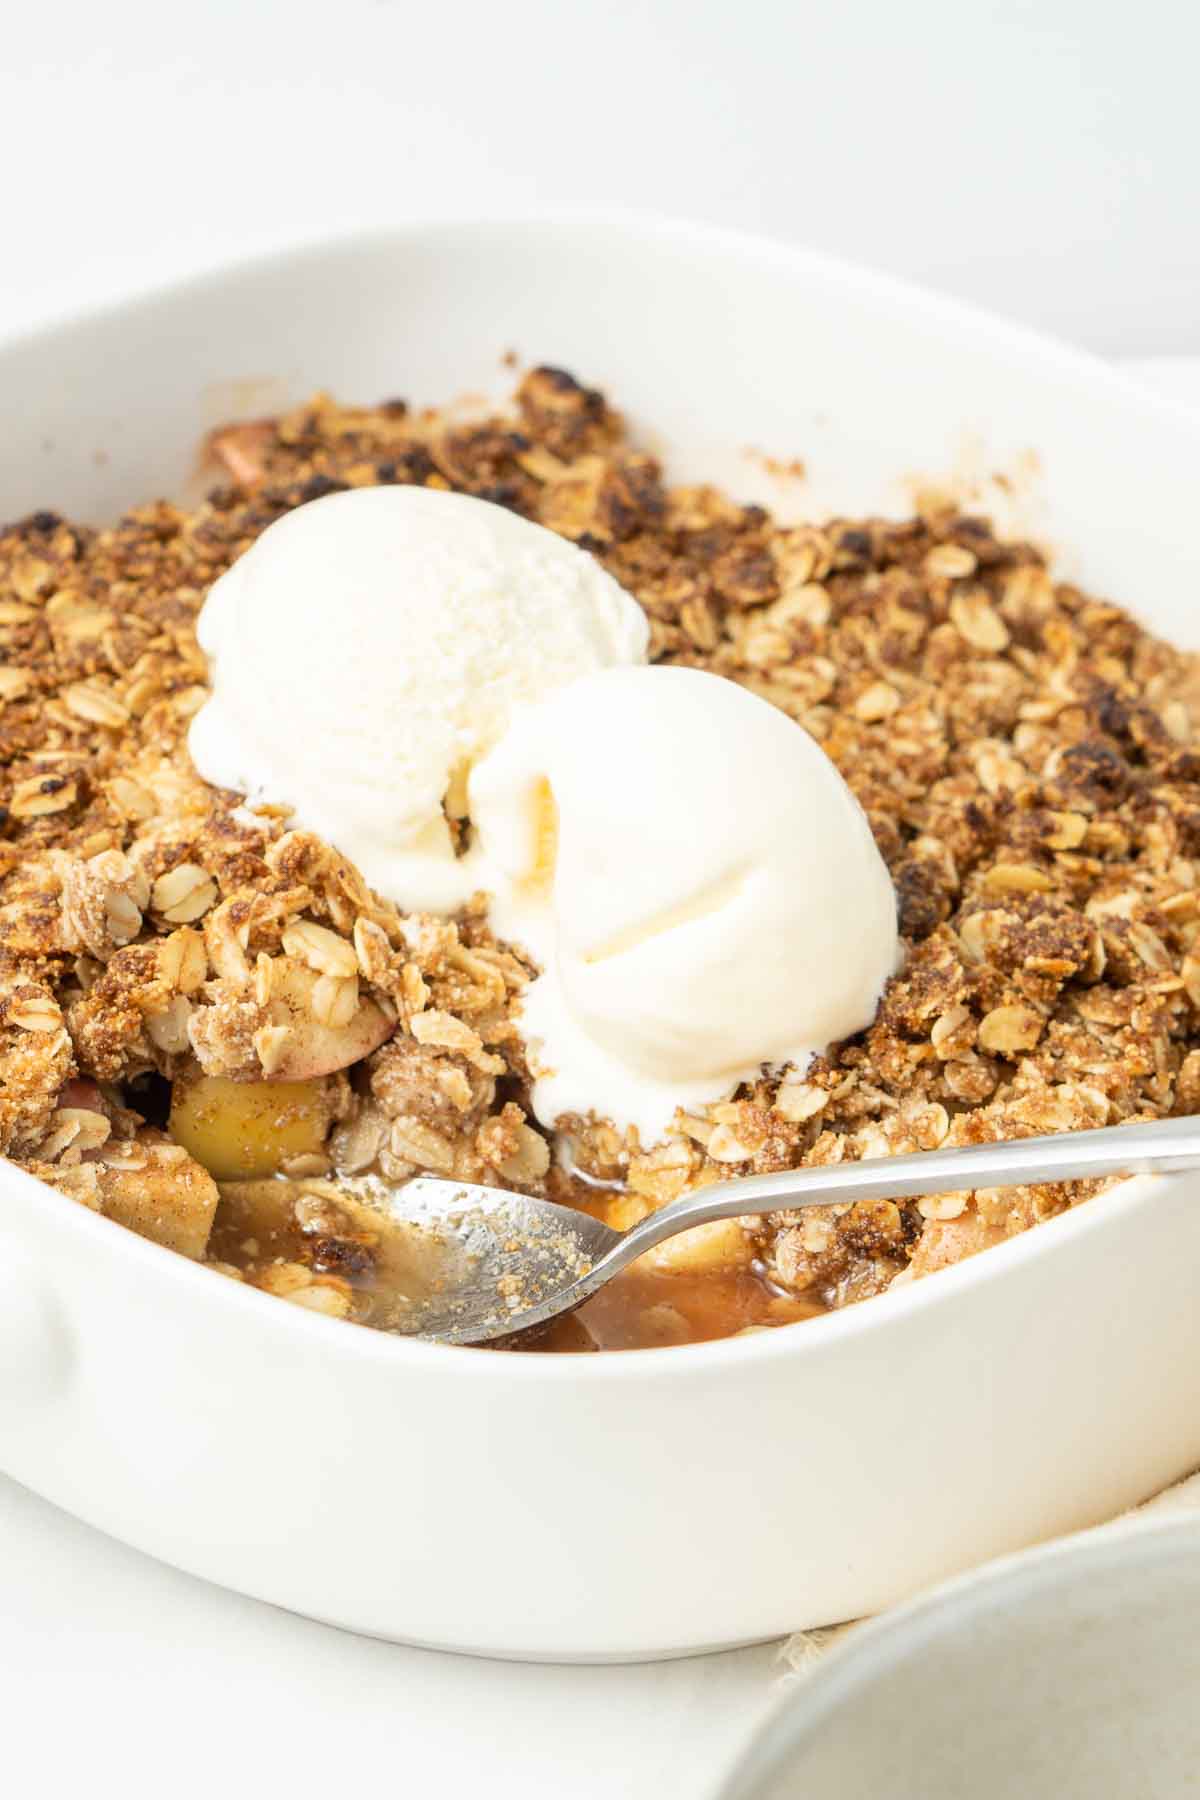 Close up of the baked vegan apple crumble with melting vanilla ice cream.